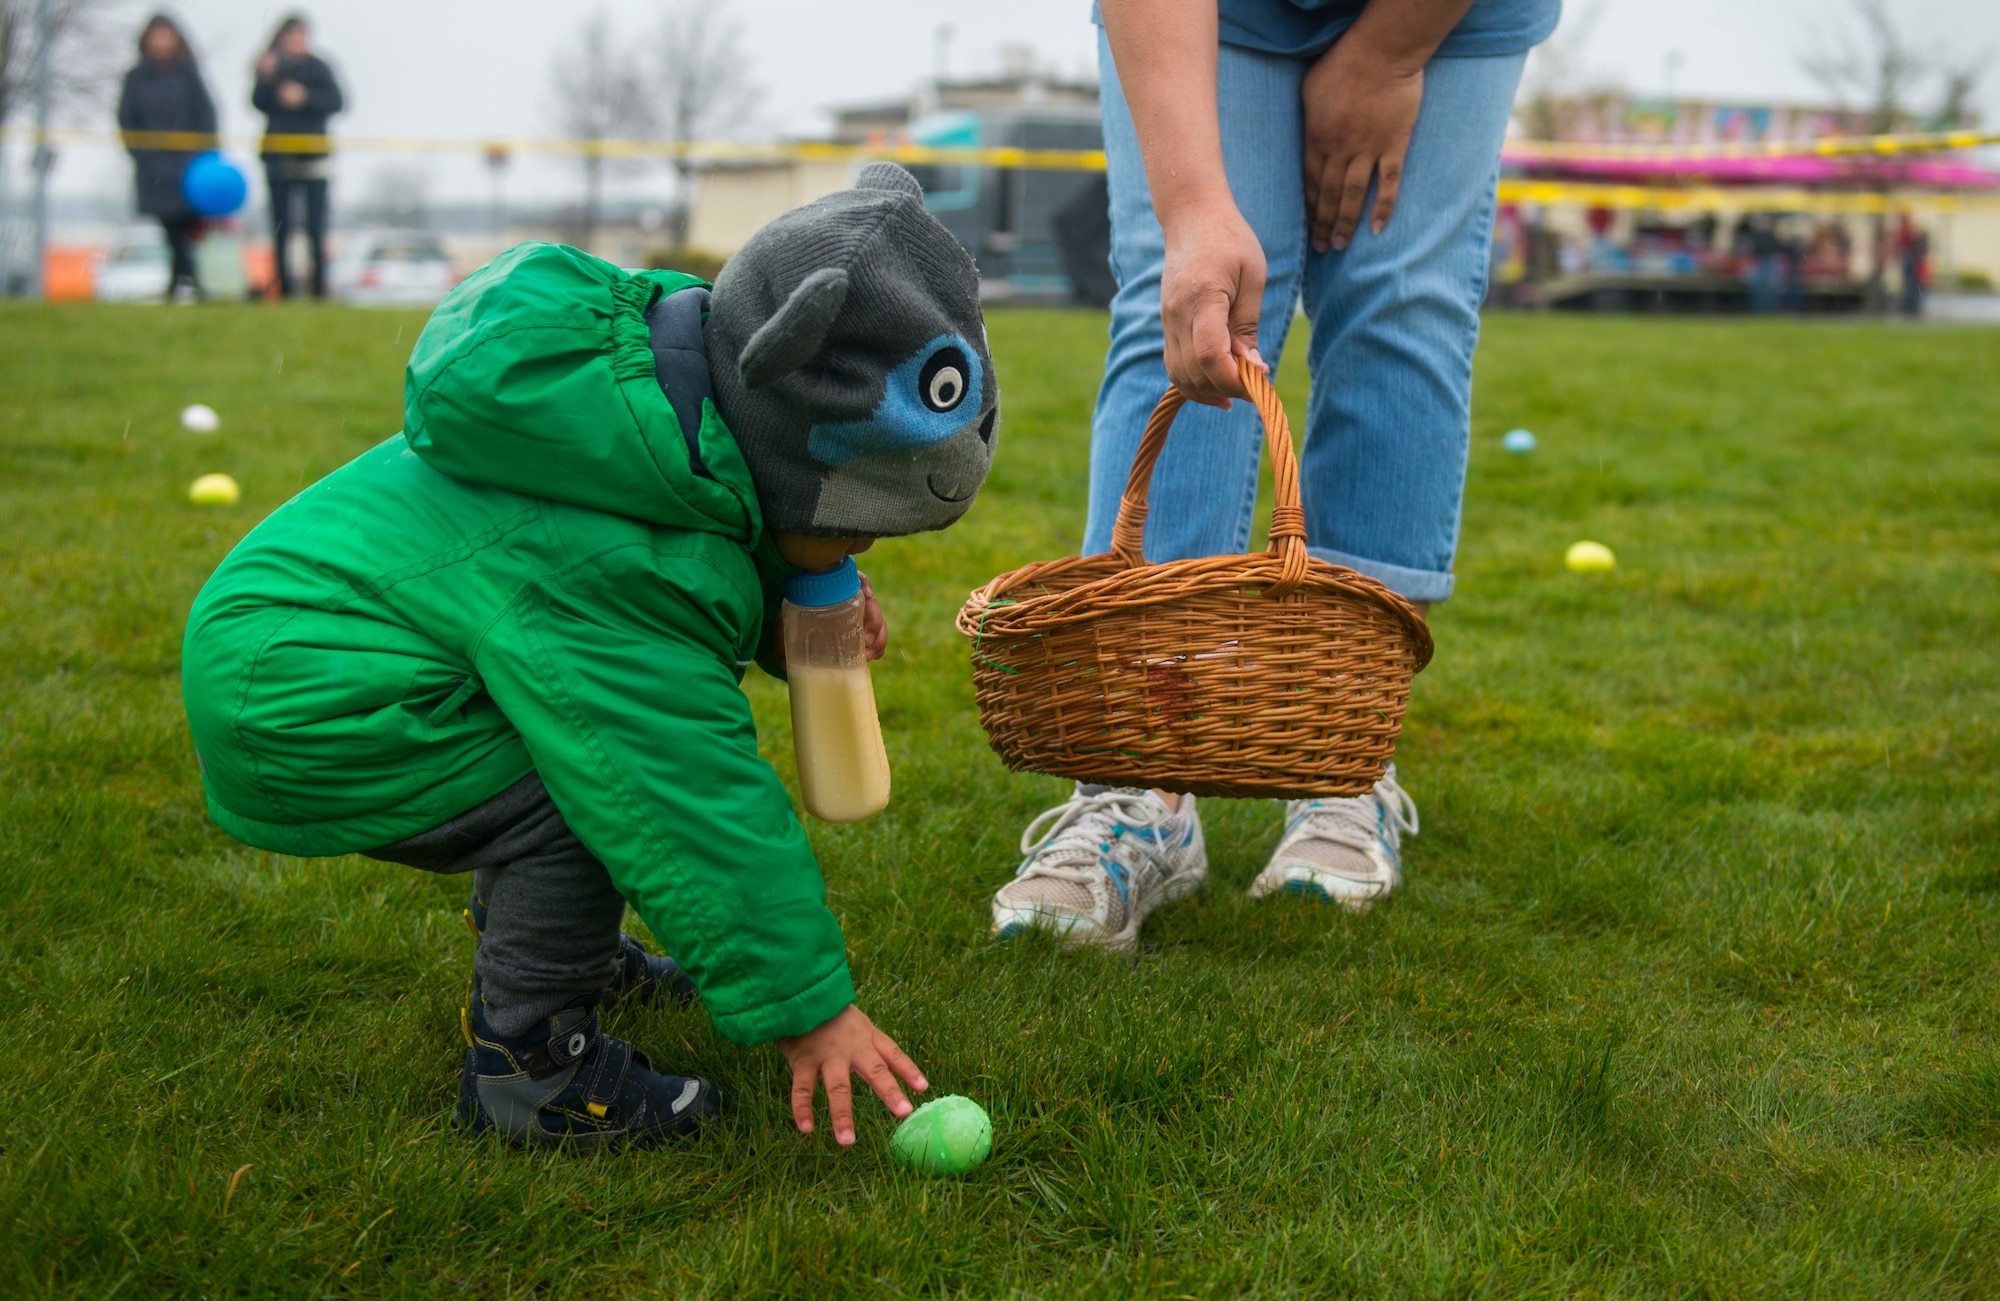 A child reaches for a plastic egg while participating in an Easter egg hunt on the grass field outside Club Eifel at Spangdahlem Air Base, Germany, April 4, 2015. Parents of children the ages 3 and younger could help in the egg hunt. (U.S. Air Force photo by Airman 1st Class Luke Kitterman/Released)
 
